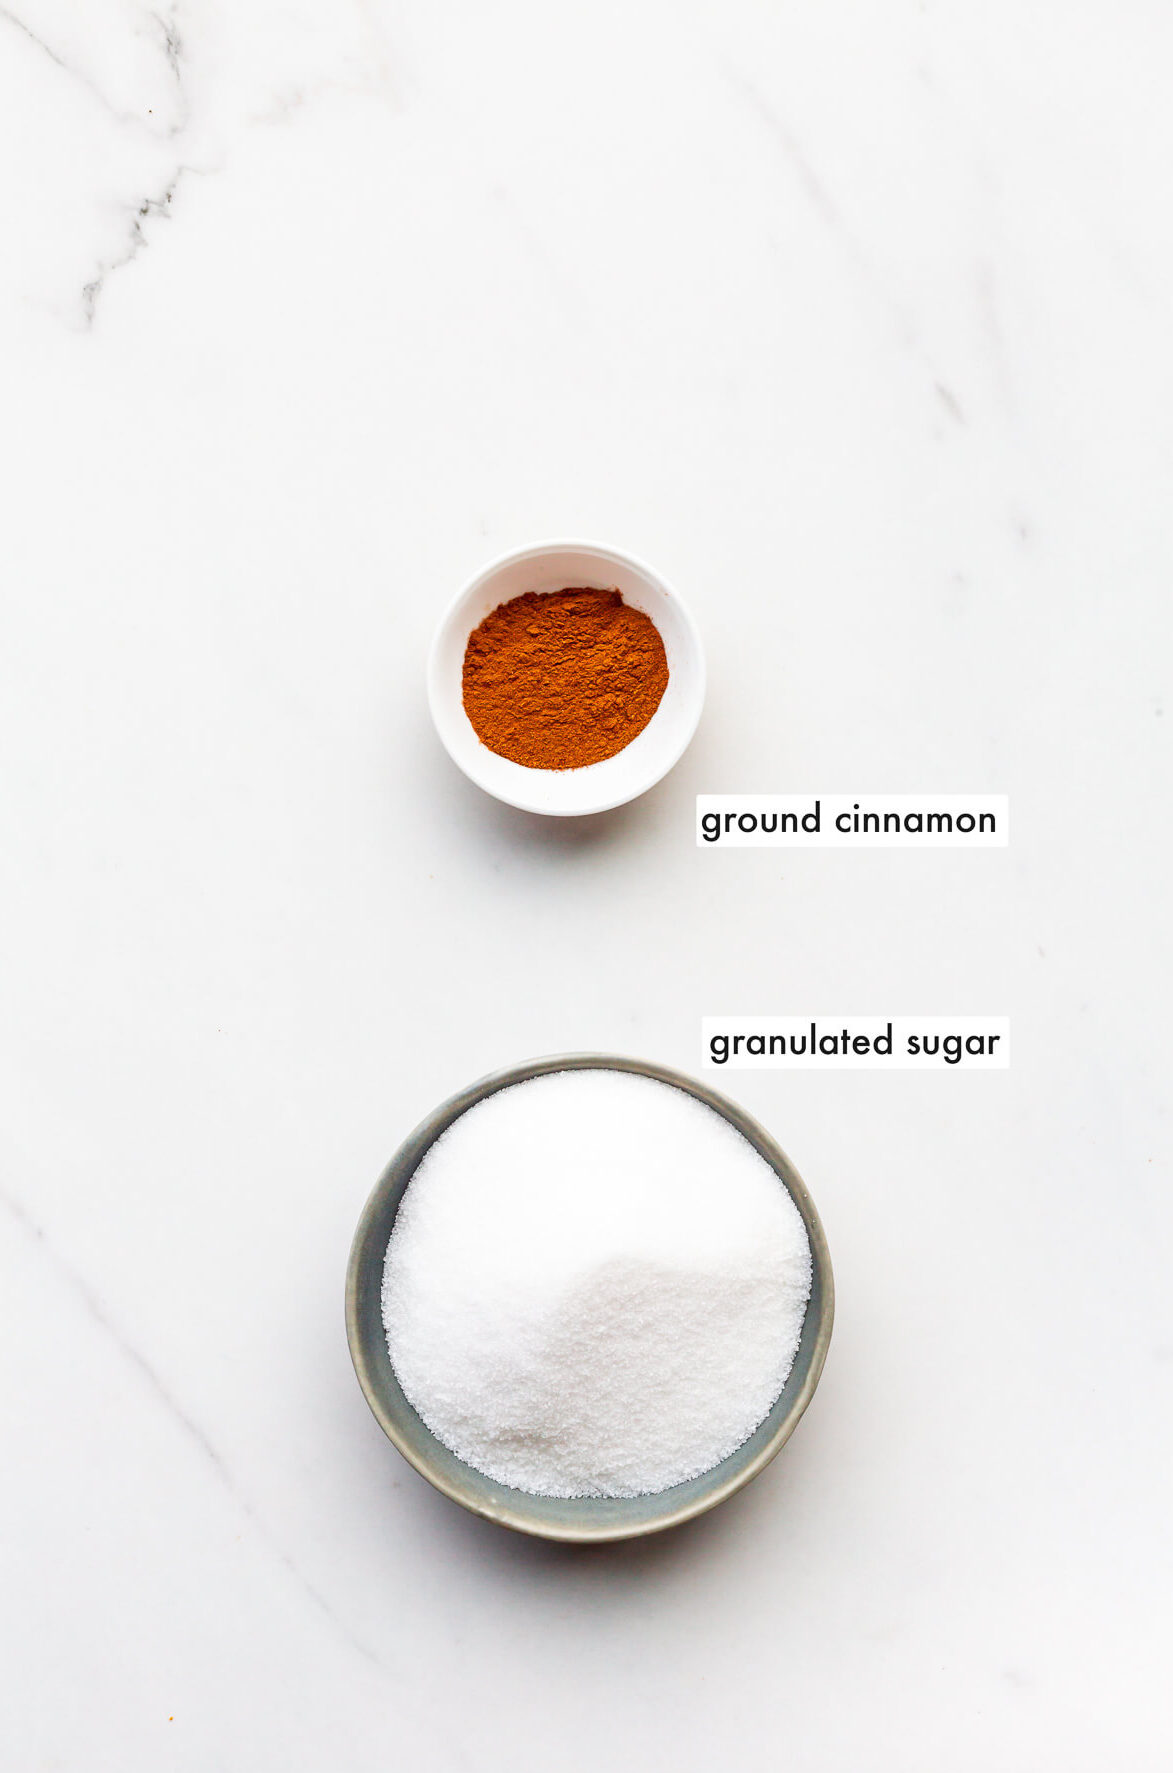 Ingredients to make cinnamon sugar from scratch.